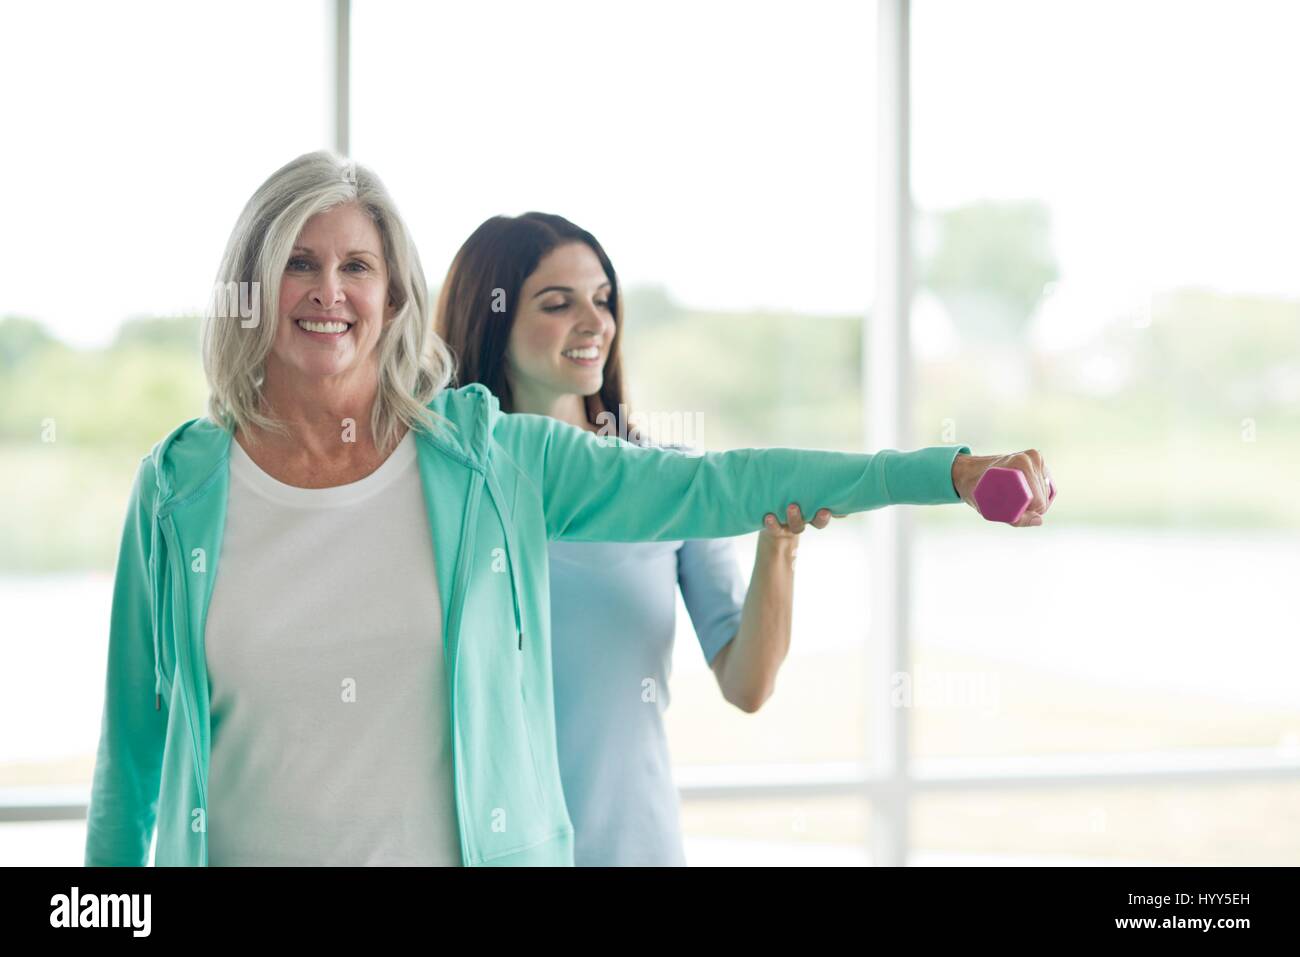 Senior woman using hand weight with personal trainer. Stock Photo